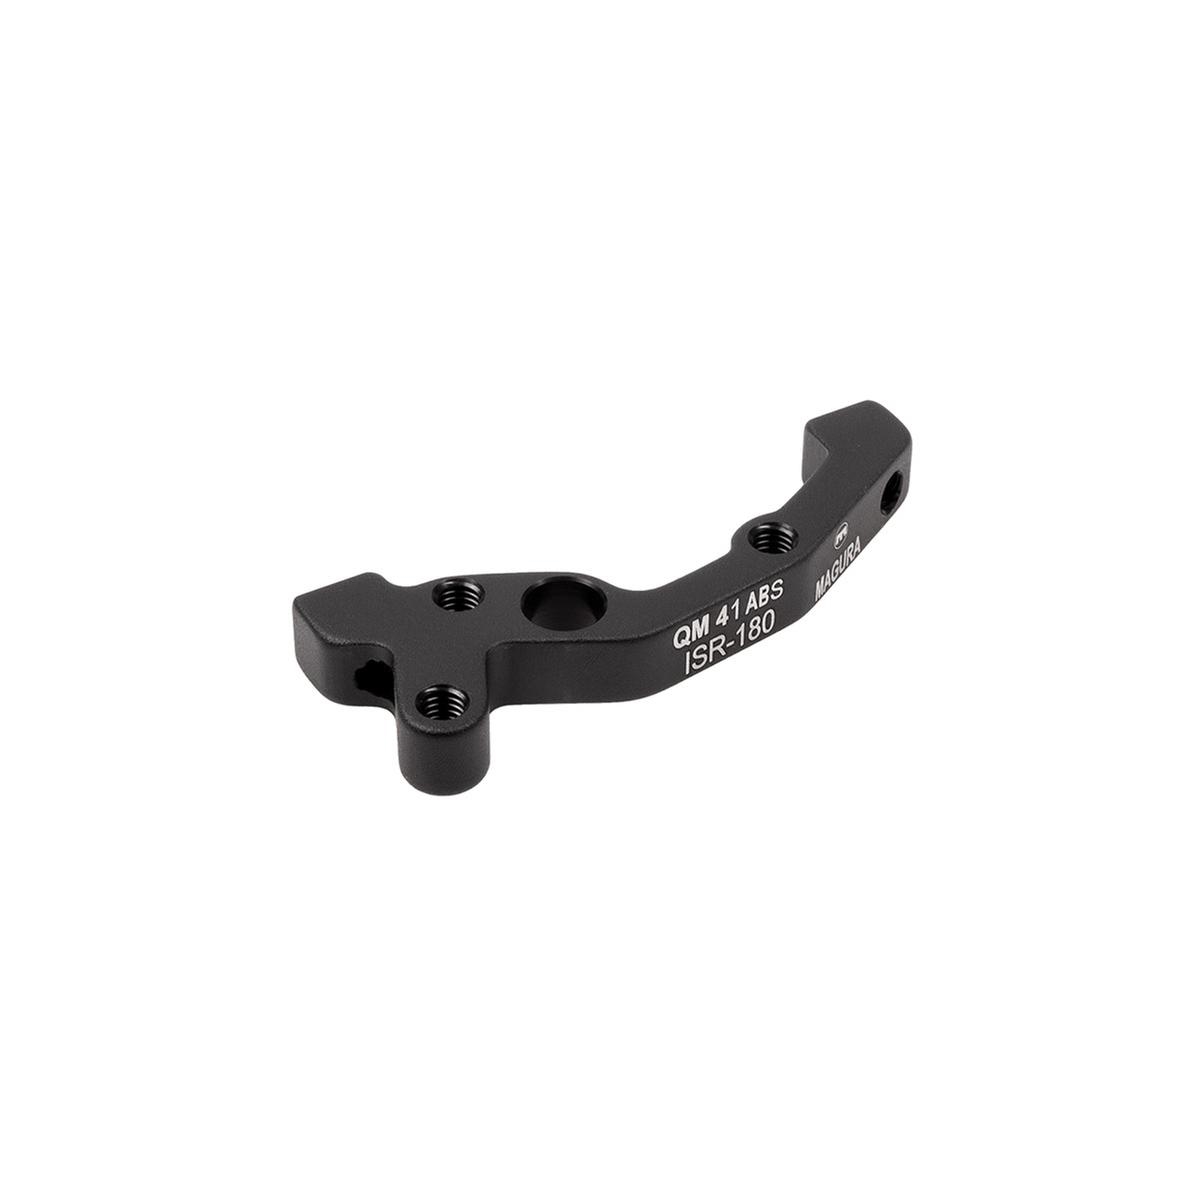 Rear Disc Brake Adapter QM41 ABS IS-PM 180mm